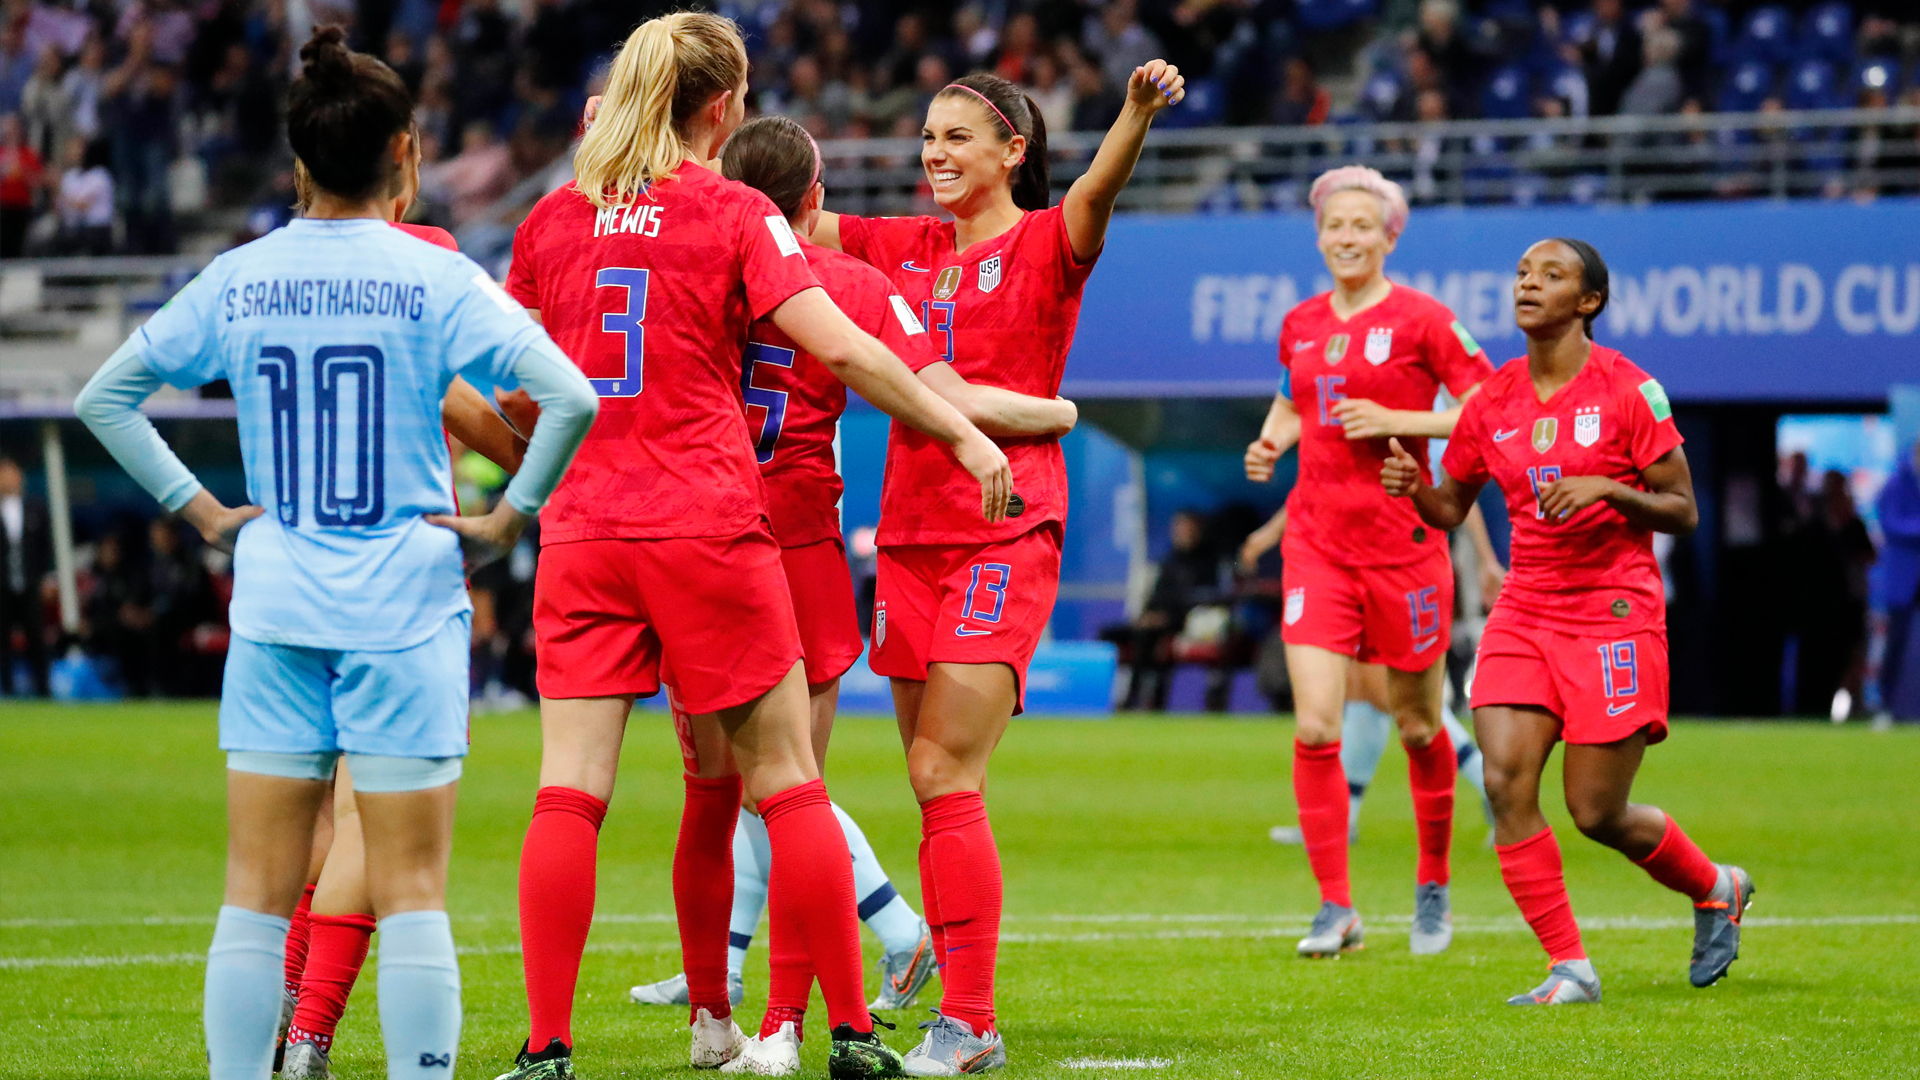 Team USA vs. Chile live stream: Watch 2019 Women's World Cup online